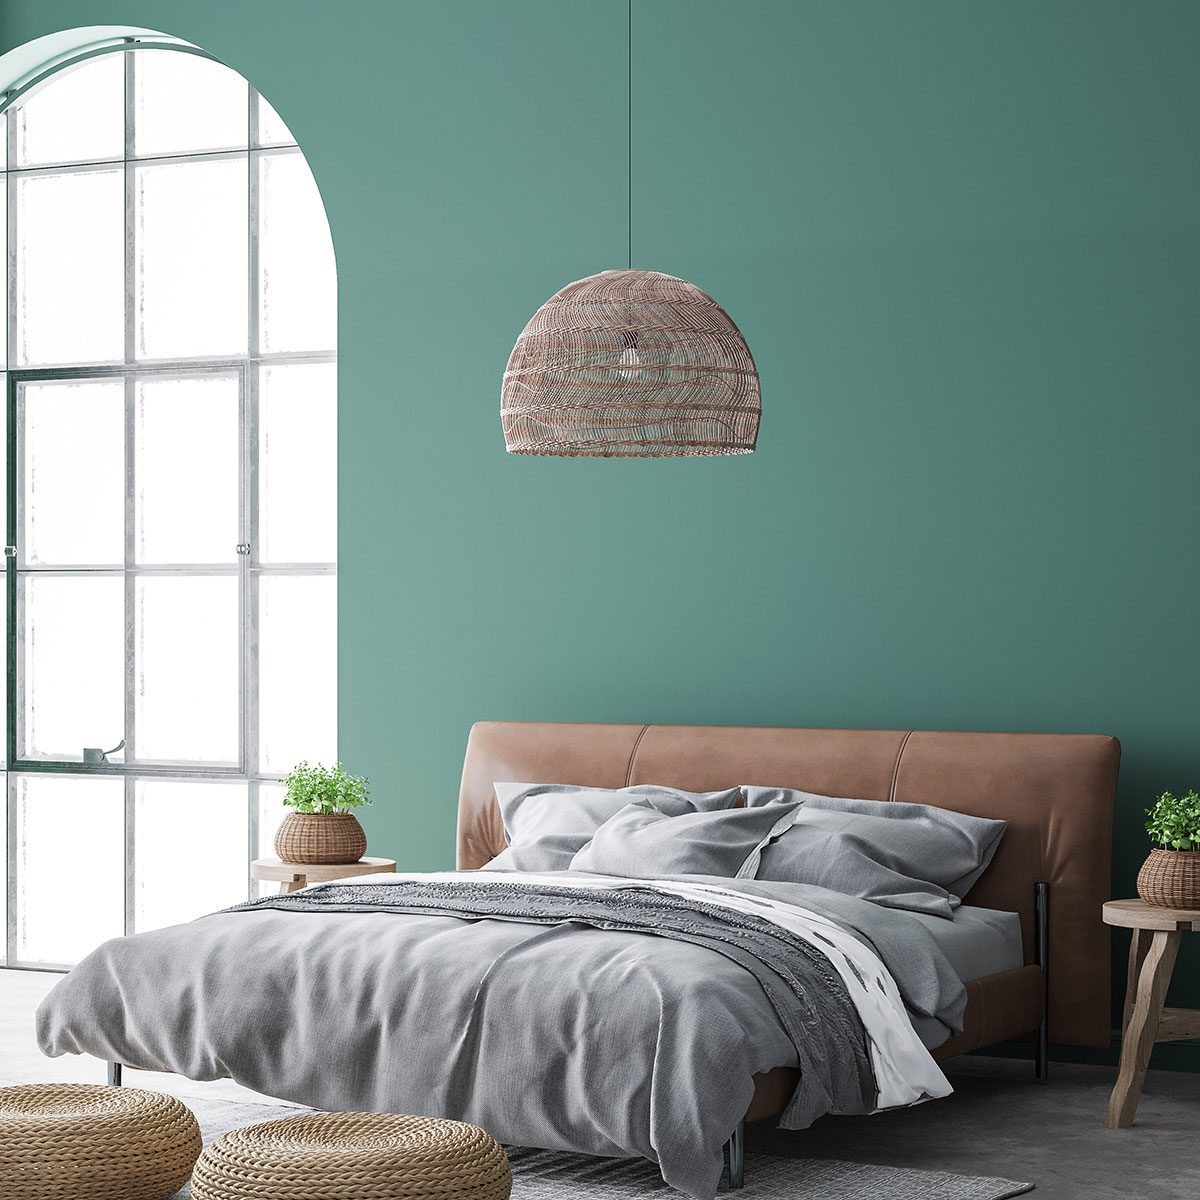 Minimal Bedroom Design, Interior Wall Mockup With Brown Leather Bed On Green Wall Background